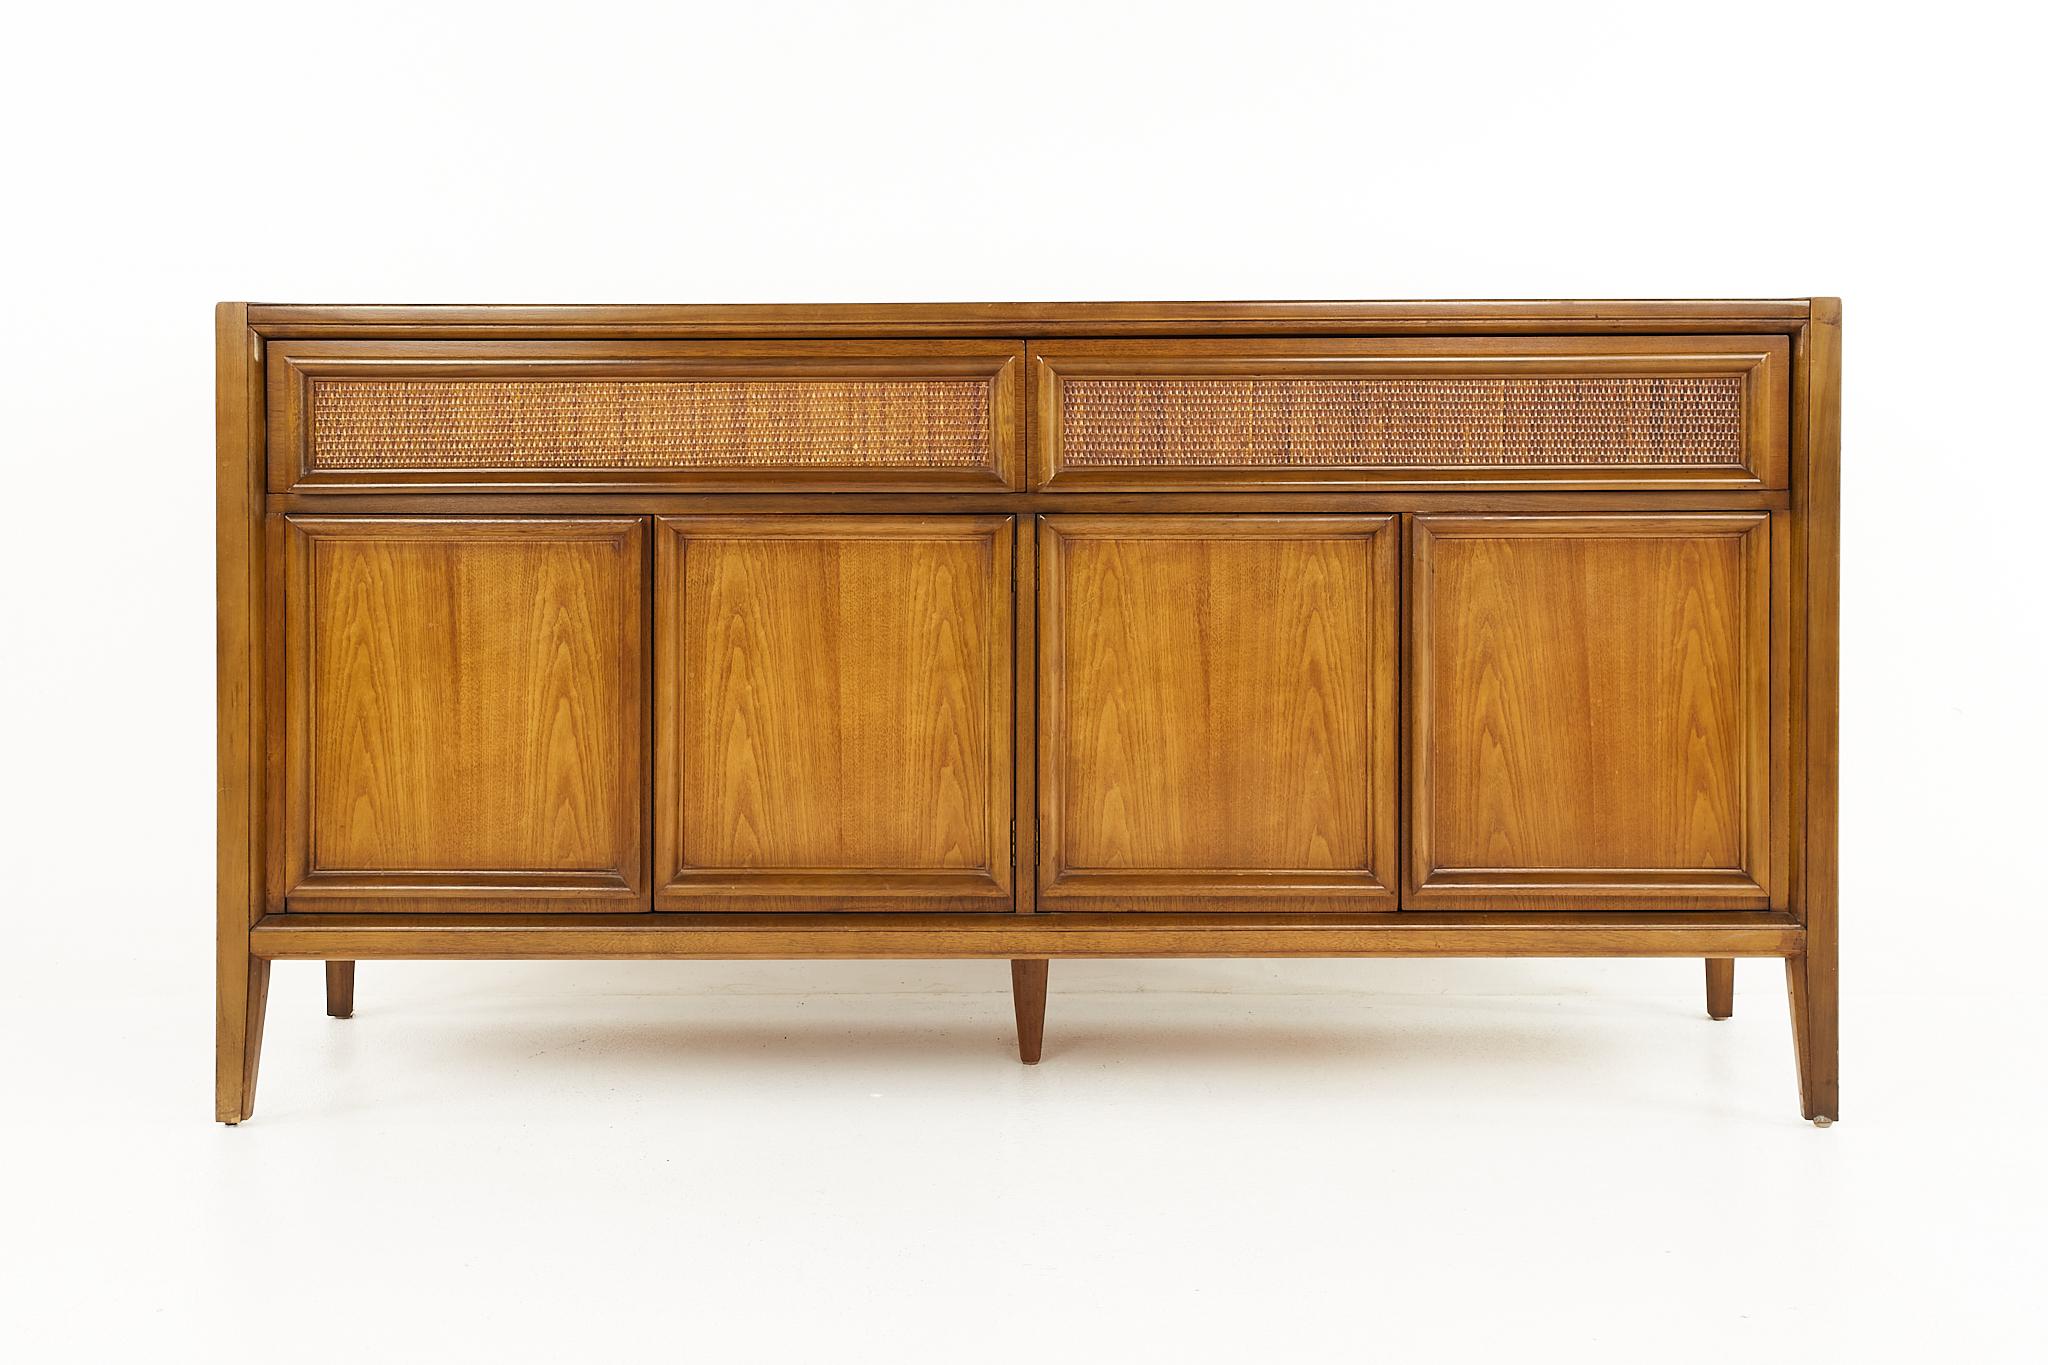 Founders style mid century walnut basket woven front credenza buffet

The credenza measures: 62 wide x 19 deep x 31.75 inches high

All pieces of furniture can be had in what we call restored vintage condition. That means the piece is restored